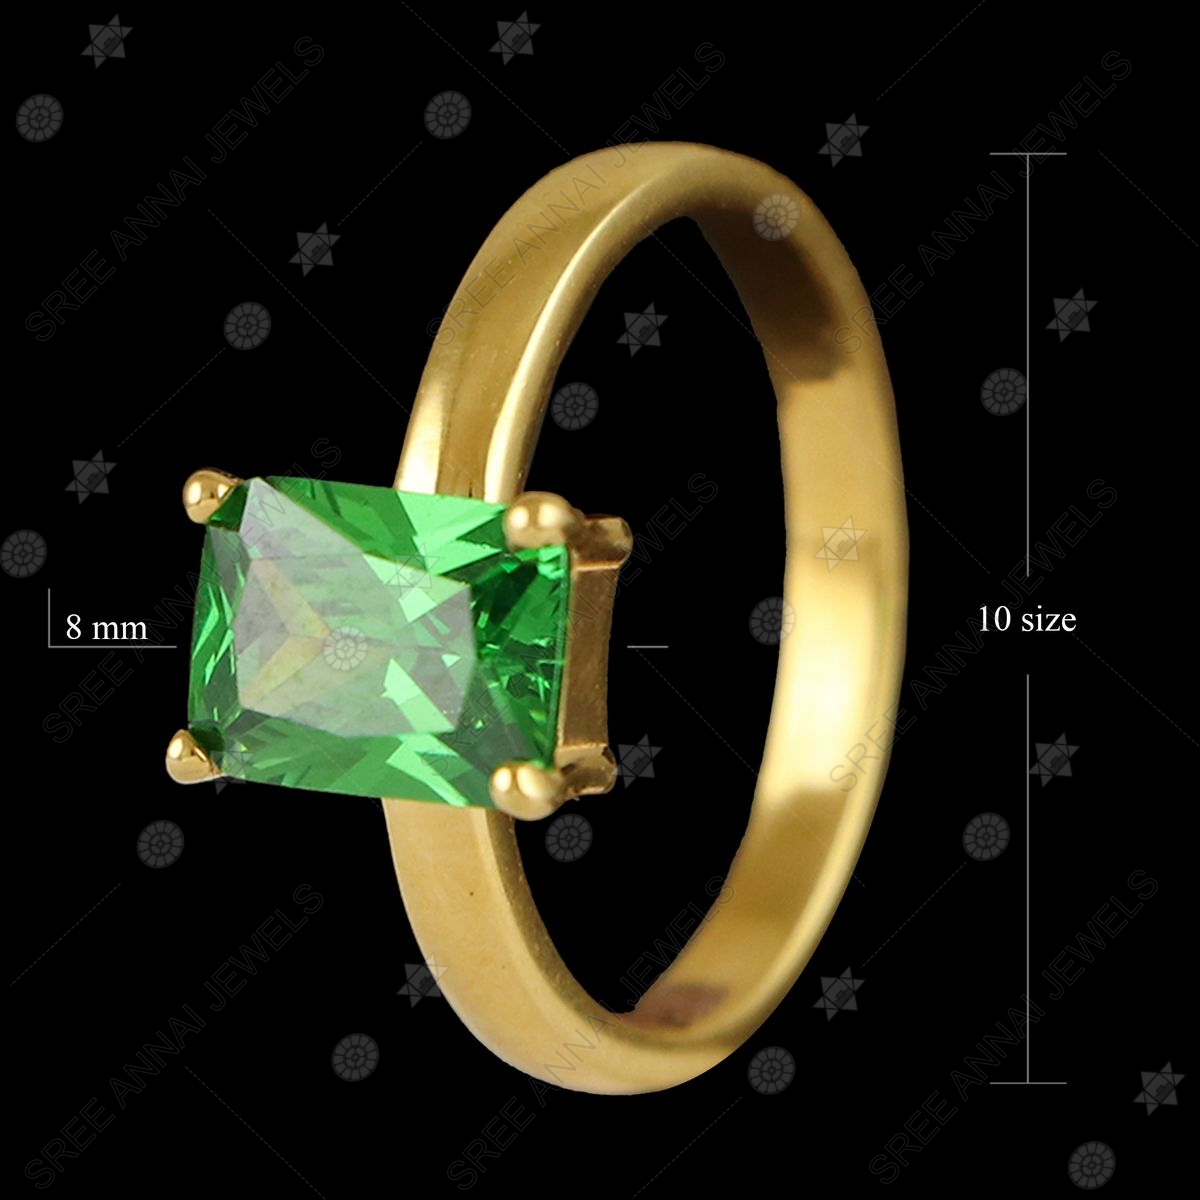 Premium Photo | A ring with a green stone and a diamond on it